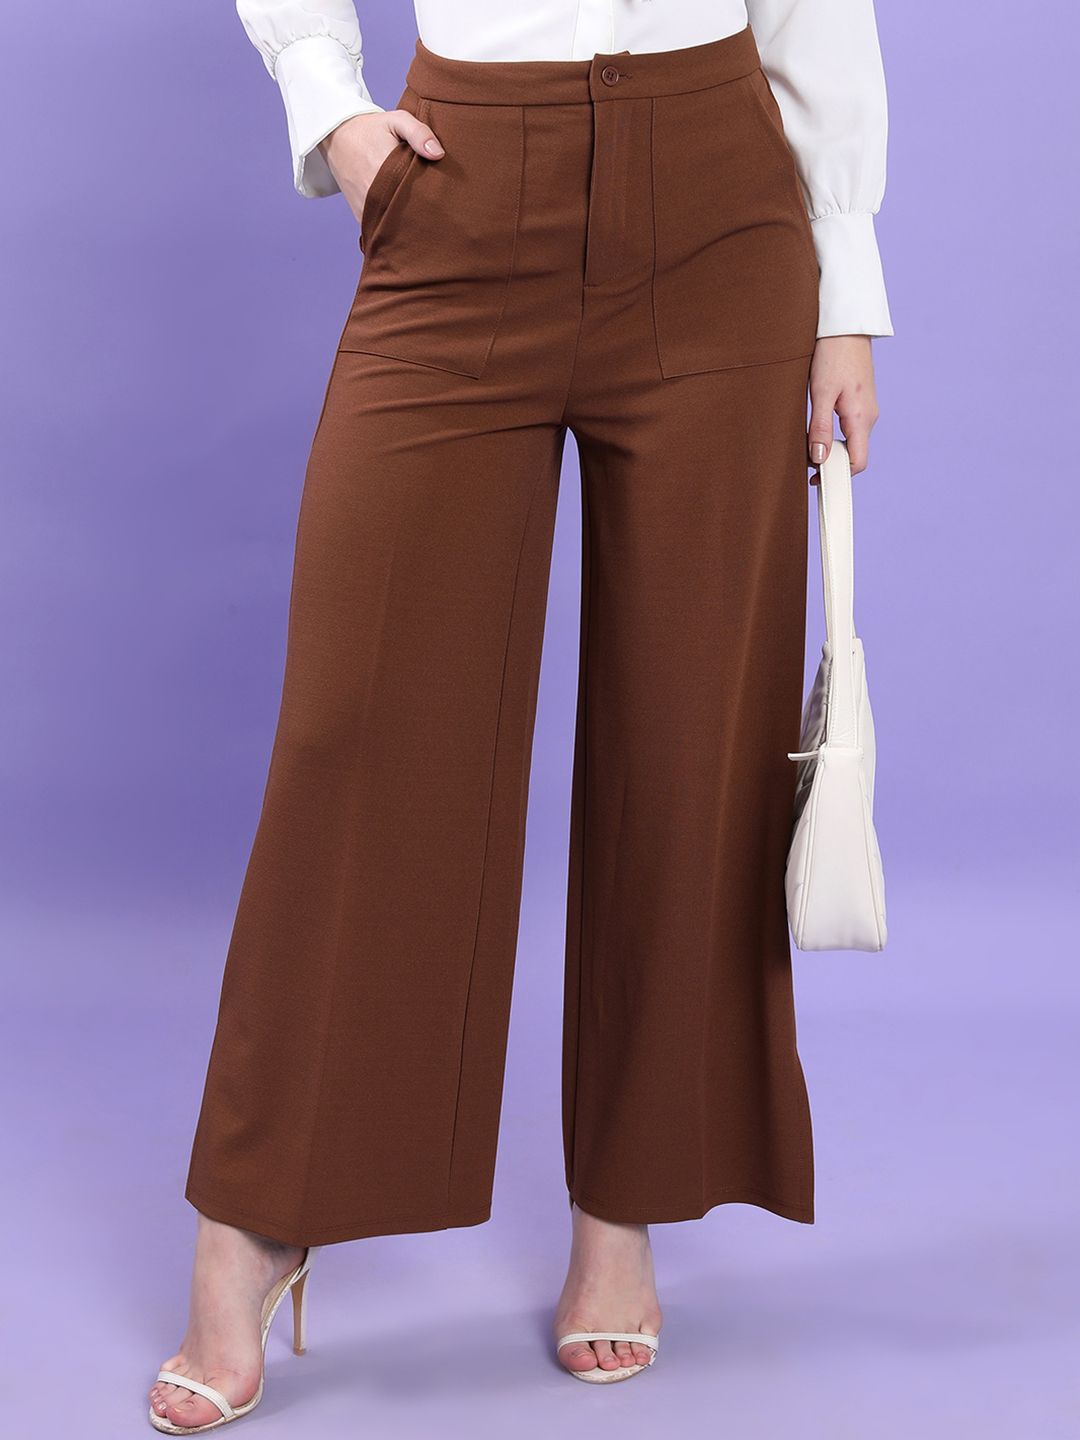 Tokyo Talkies Women Flared Plain Flat-Front Mid-Rise Wide Leg Pants Price in India